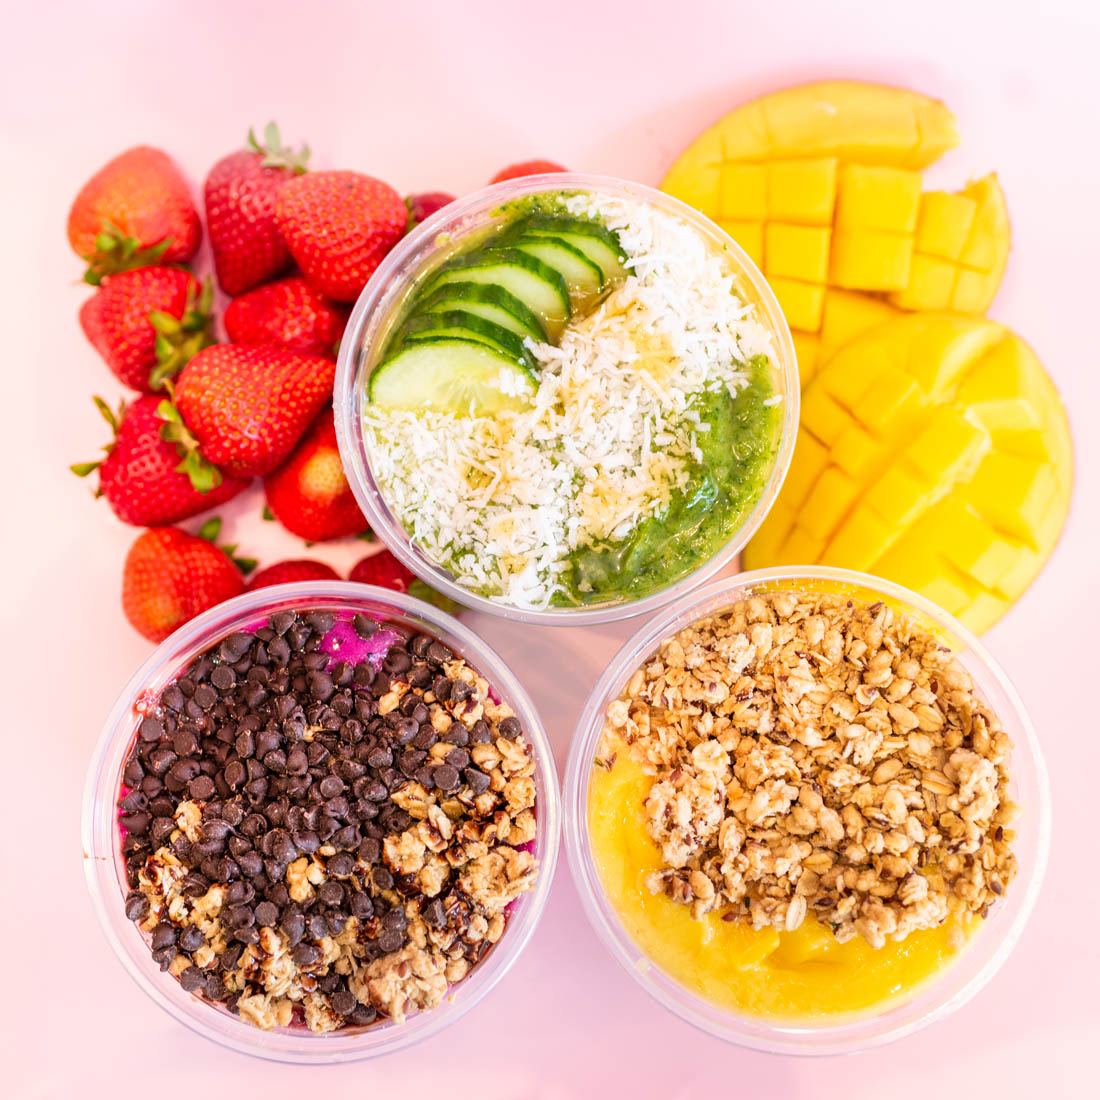 Rush Bowls smoothie bowls nutrition info in Lakewood.